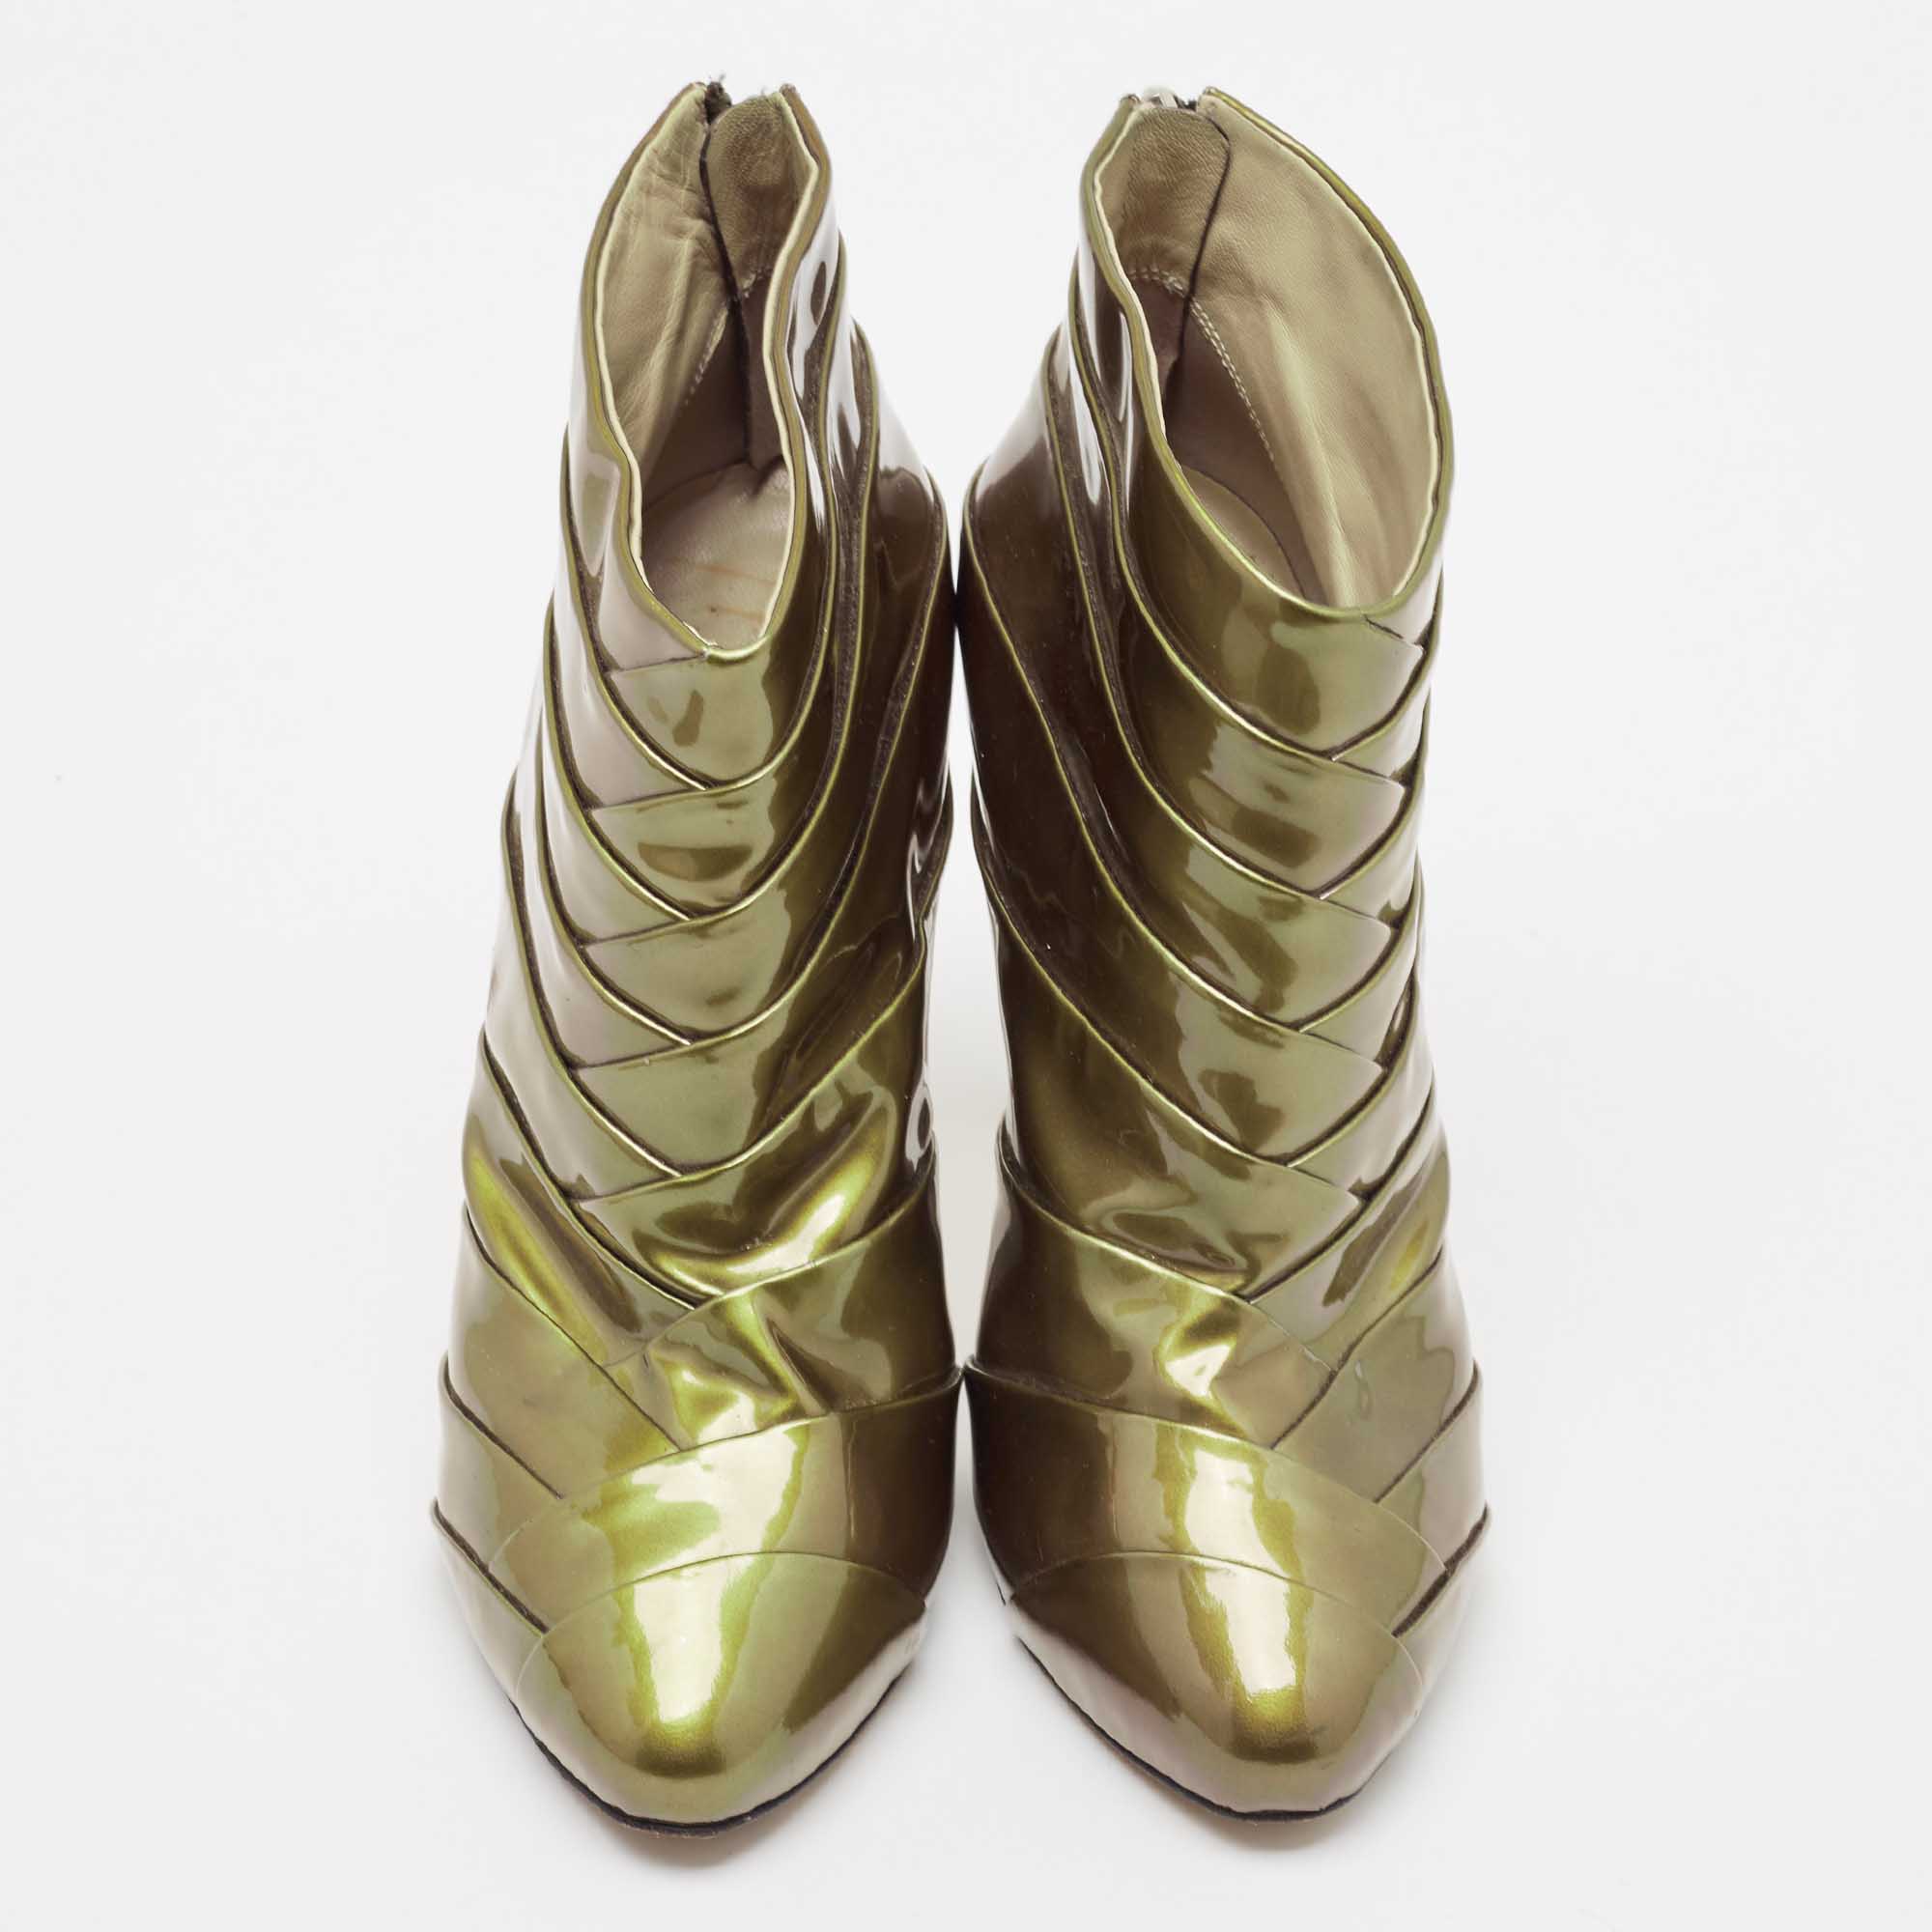 Giuseppe Zanotti Olive Green Patent Leather Ankle Booties Size 38